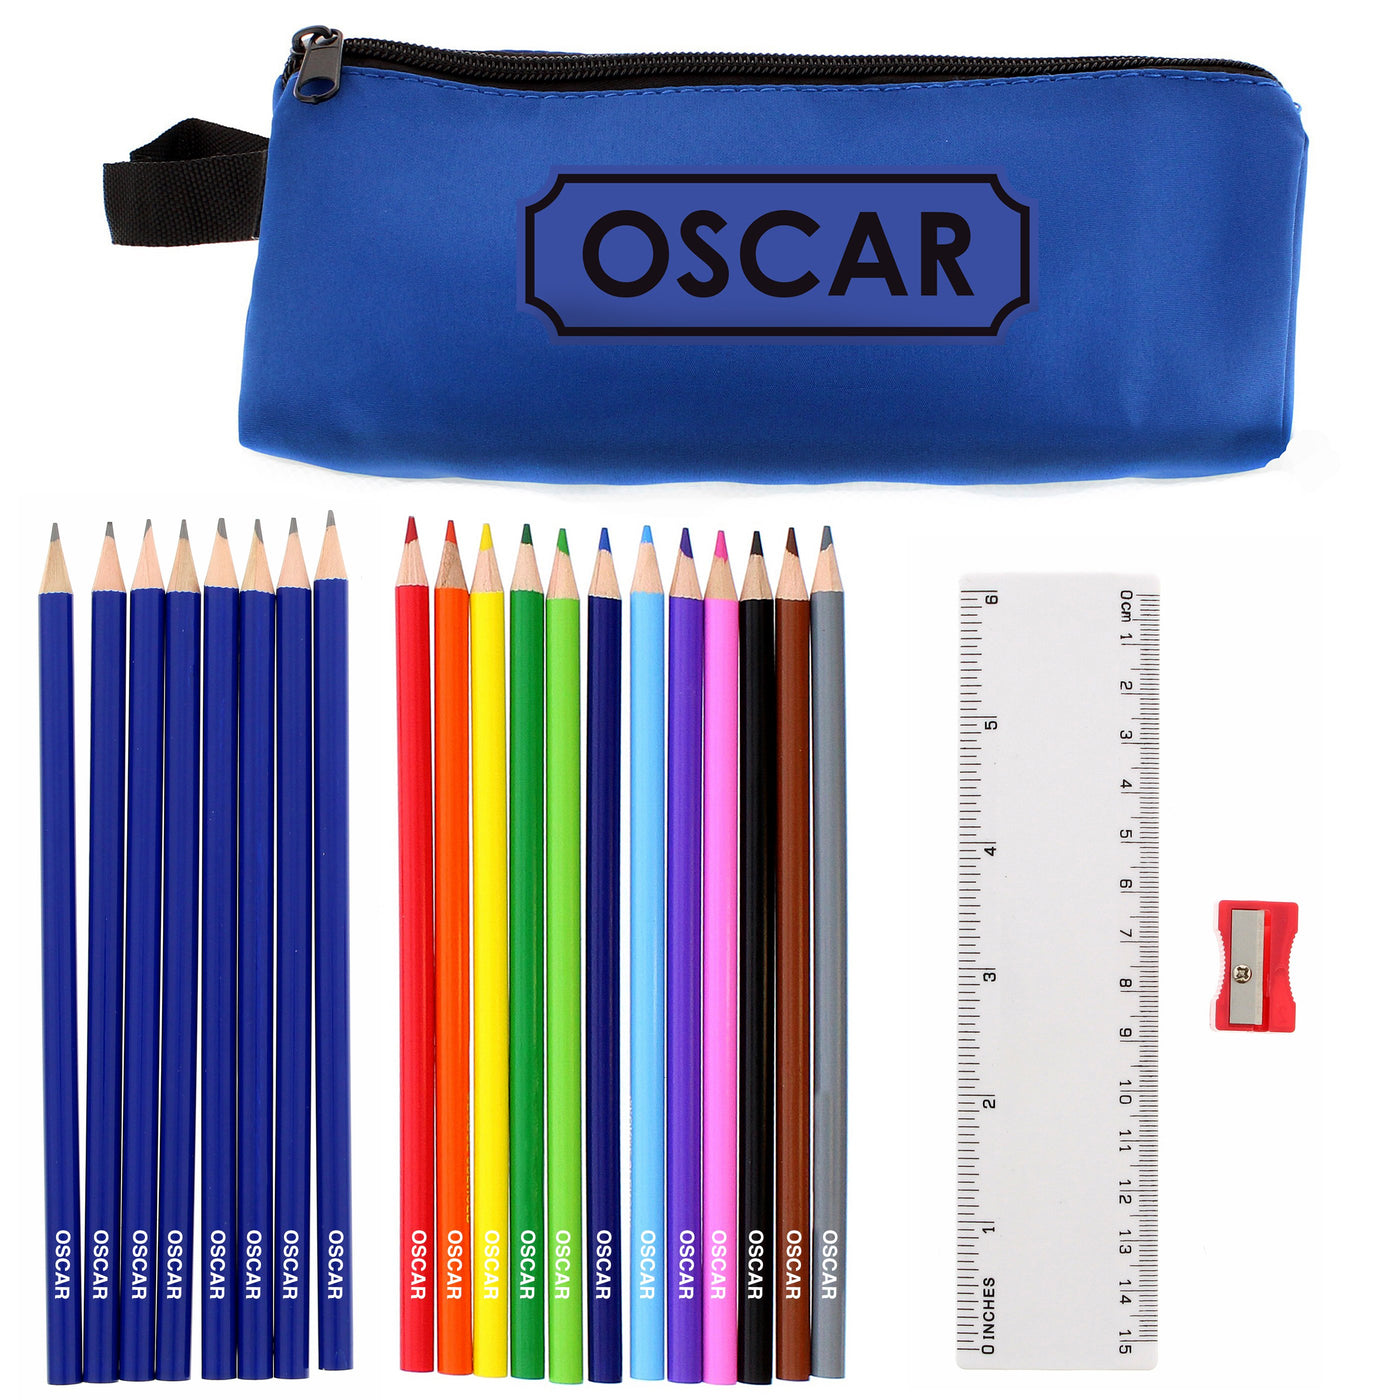 Blue Pencil Case with Personalised Pencils & Crayons - Shop Personalised Gifts